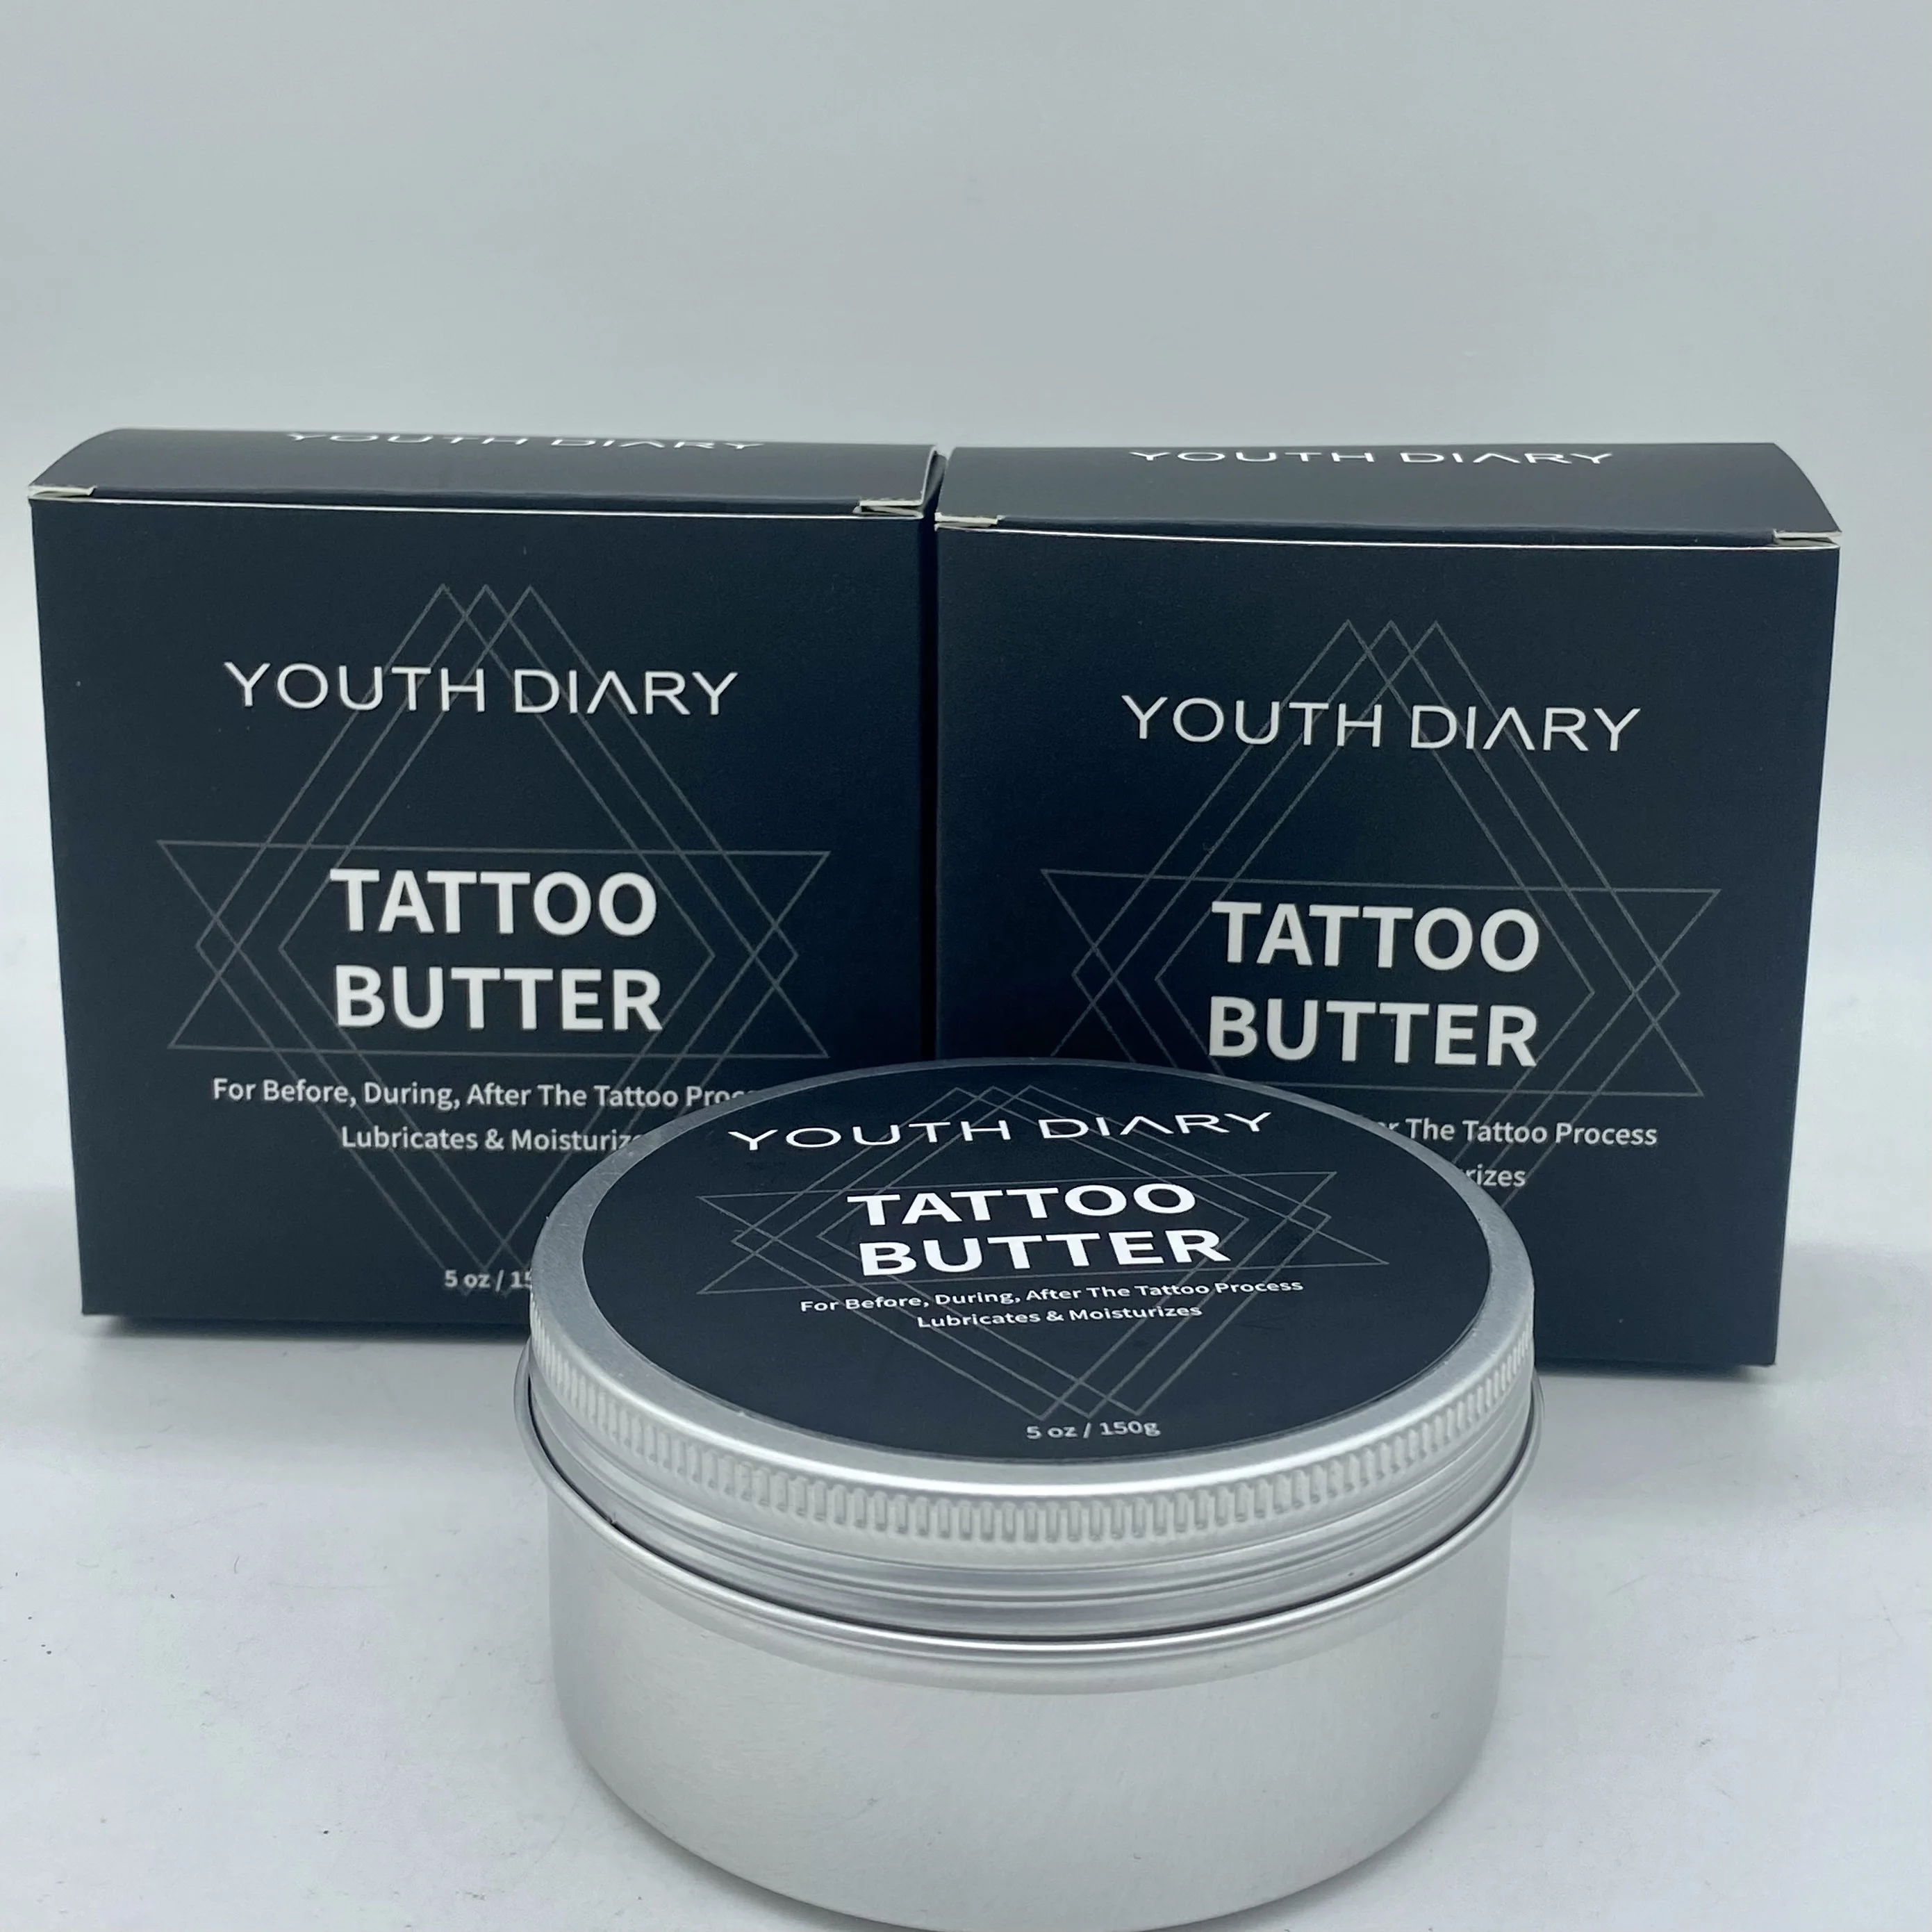 Private Label Tattoo Cream Natural Aftercare Tattoo Butter Cream Vegan  Tattoo Stick Before During Lubricates And Moisturizes - Buy Tattoo Butter Tattoo  Aftercare Tattoo Cream Painless Tattoo Cream Private Label,Tattoo Butter  Cream